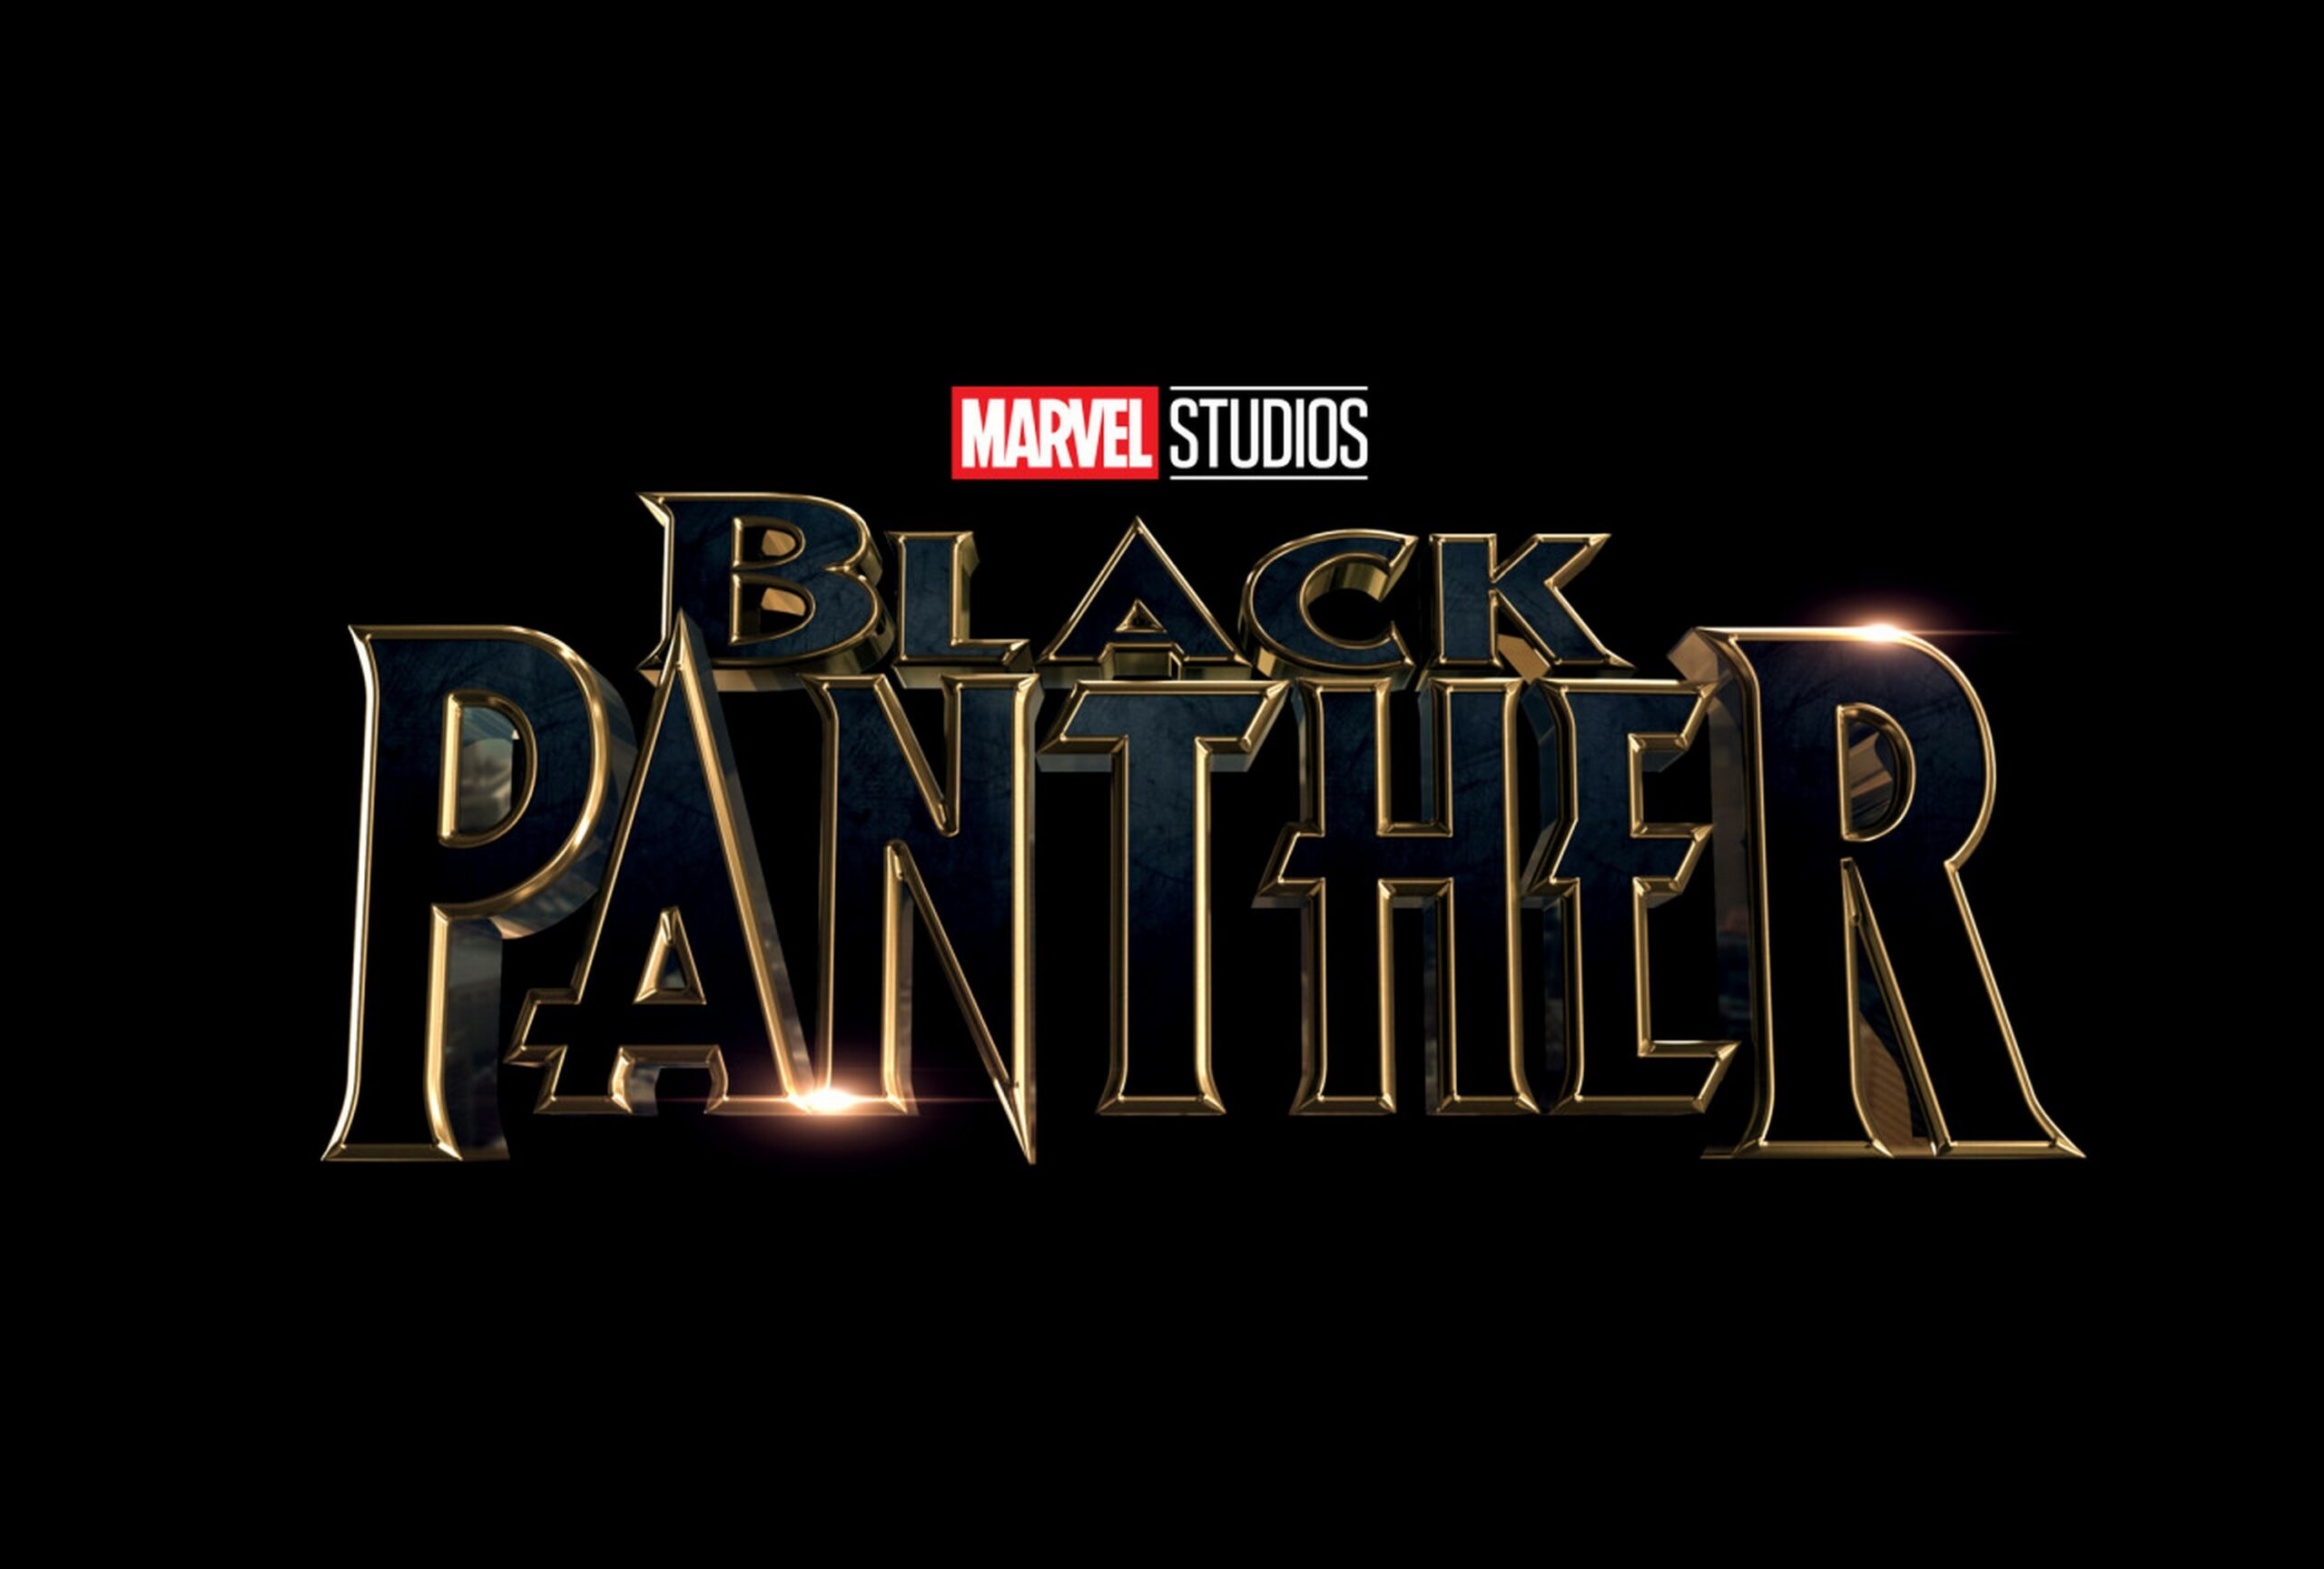 Long Live the King in this All New Black Panther Trailer